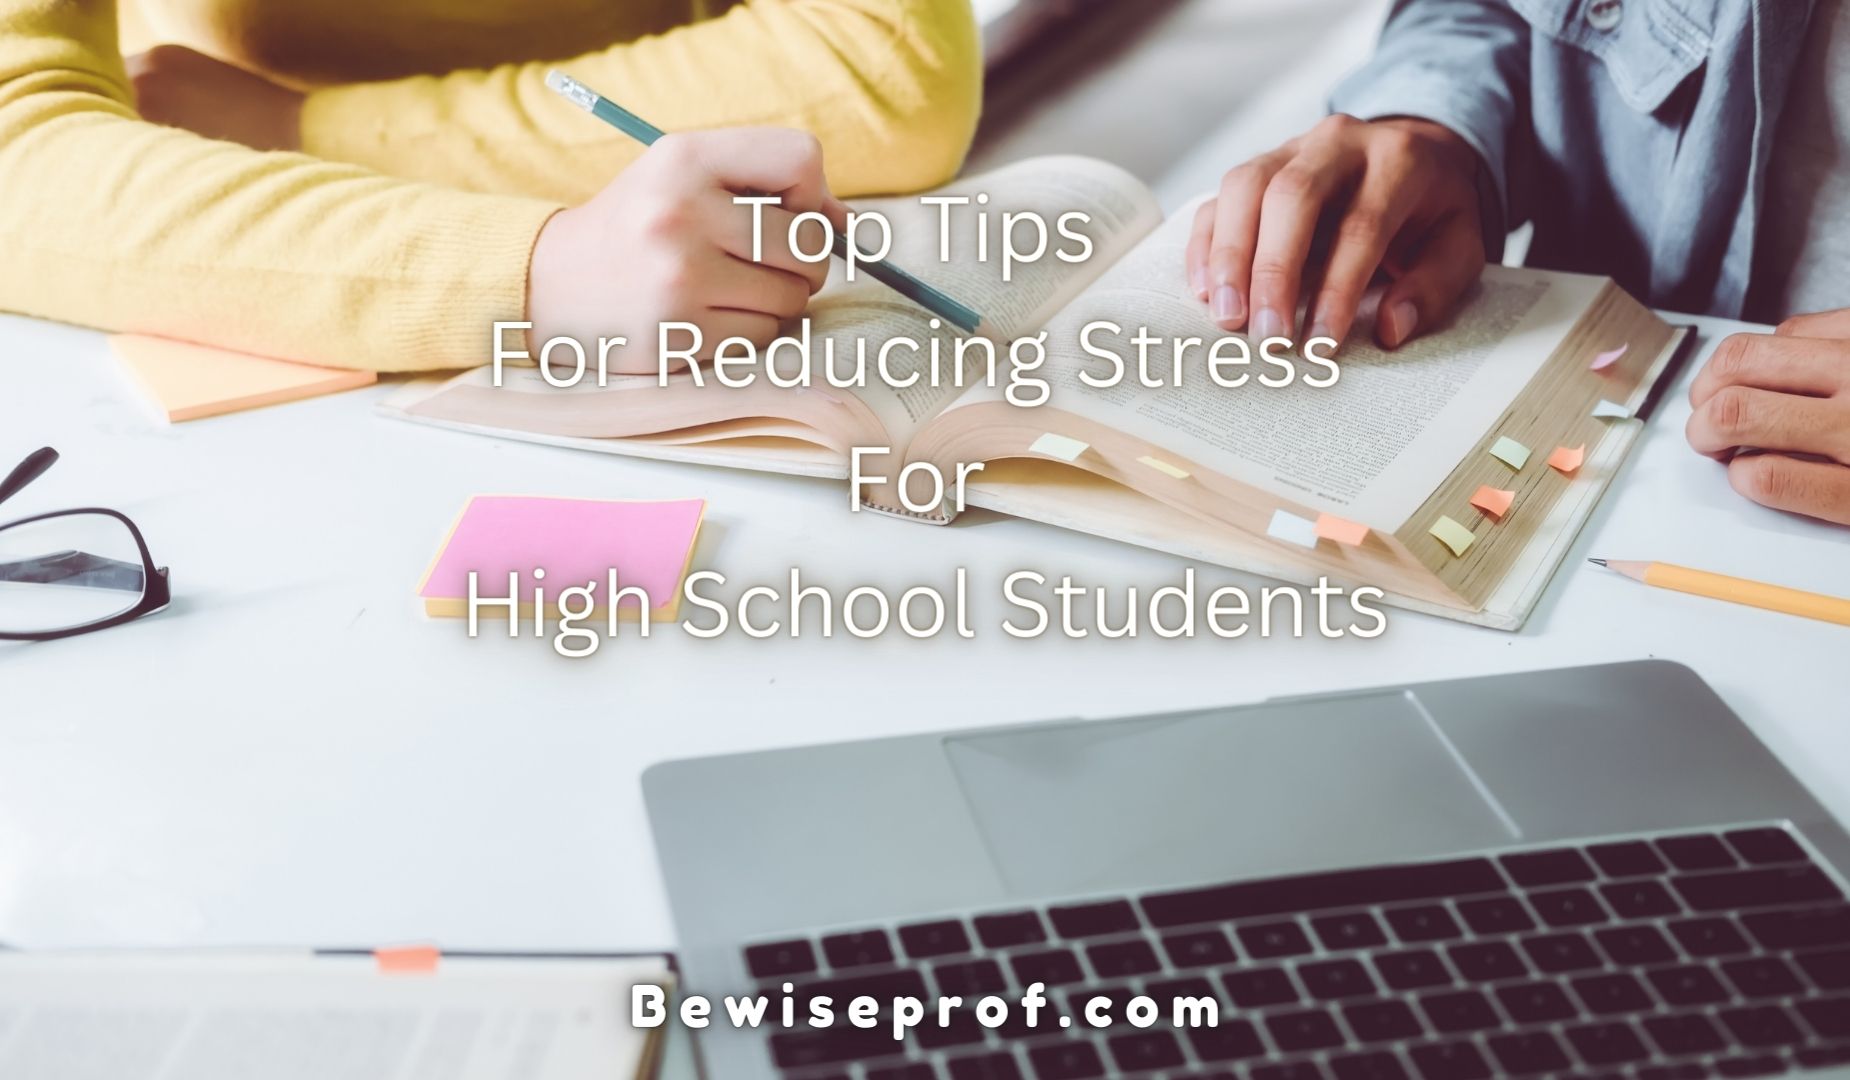 Top Tips For Reducing Stress For High School Students